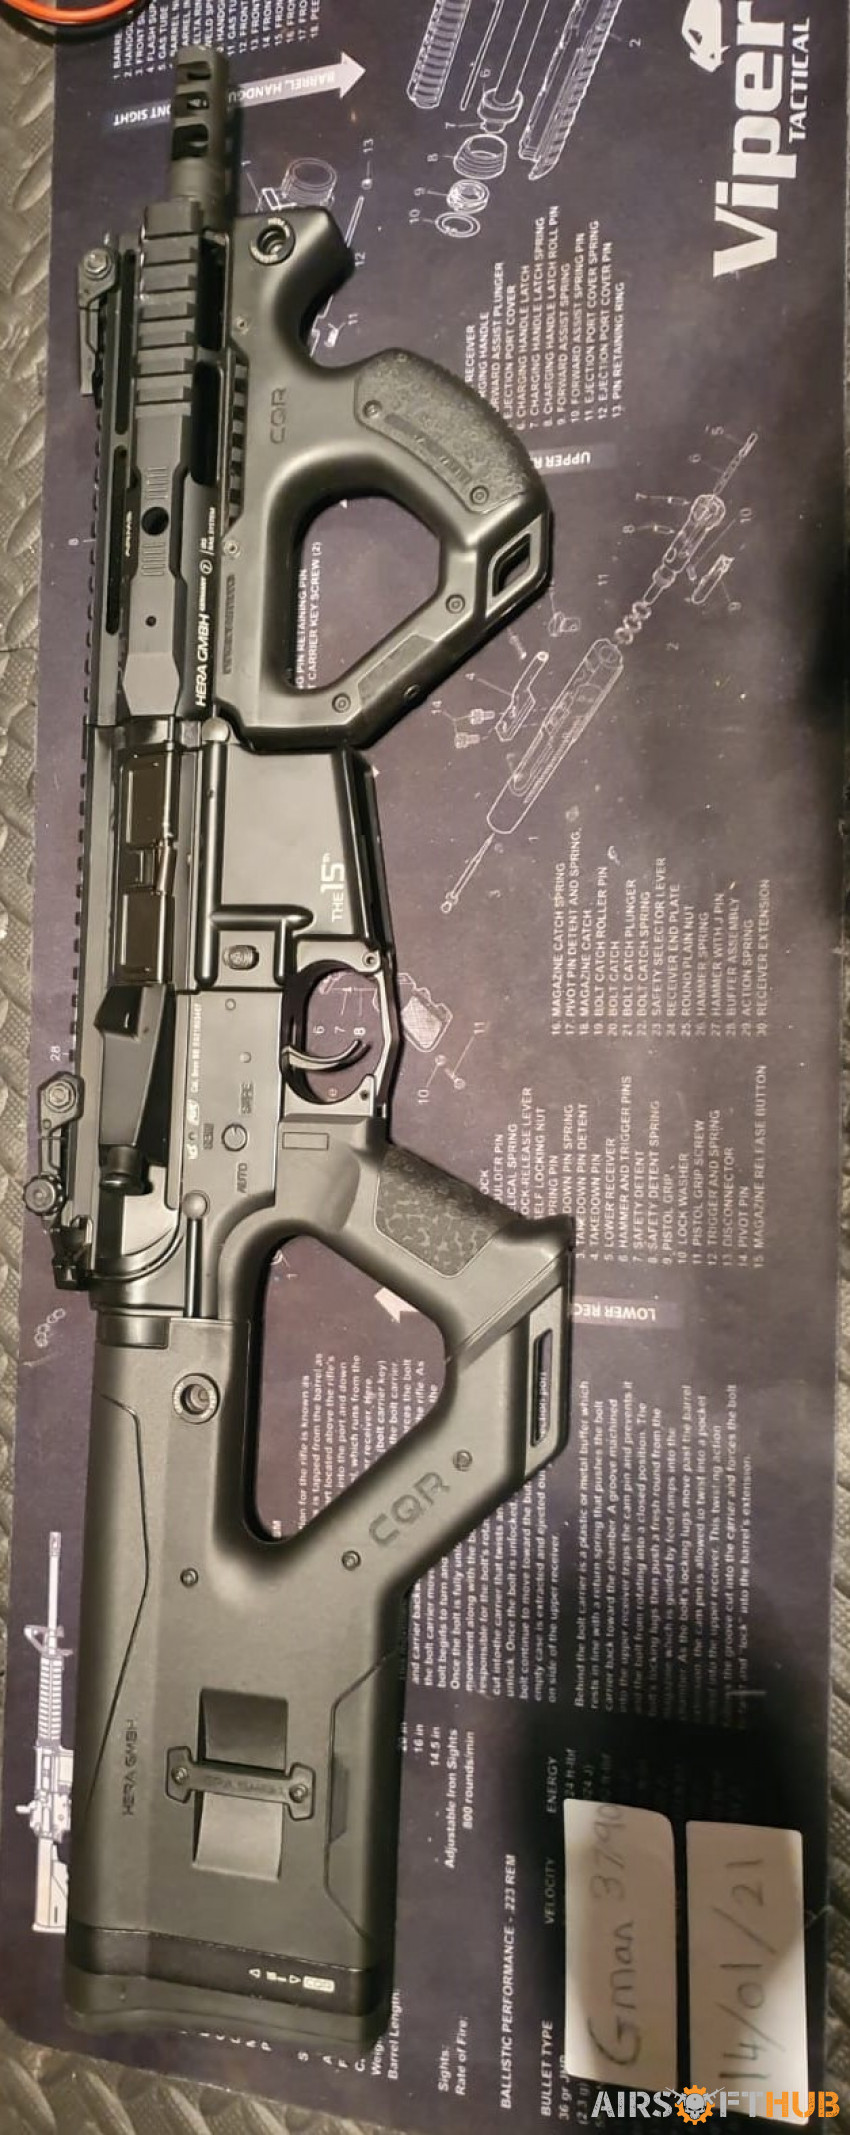 ICS Hera Arms CQR - Used airsoft equipment